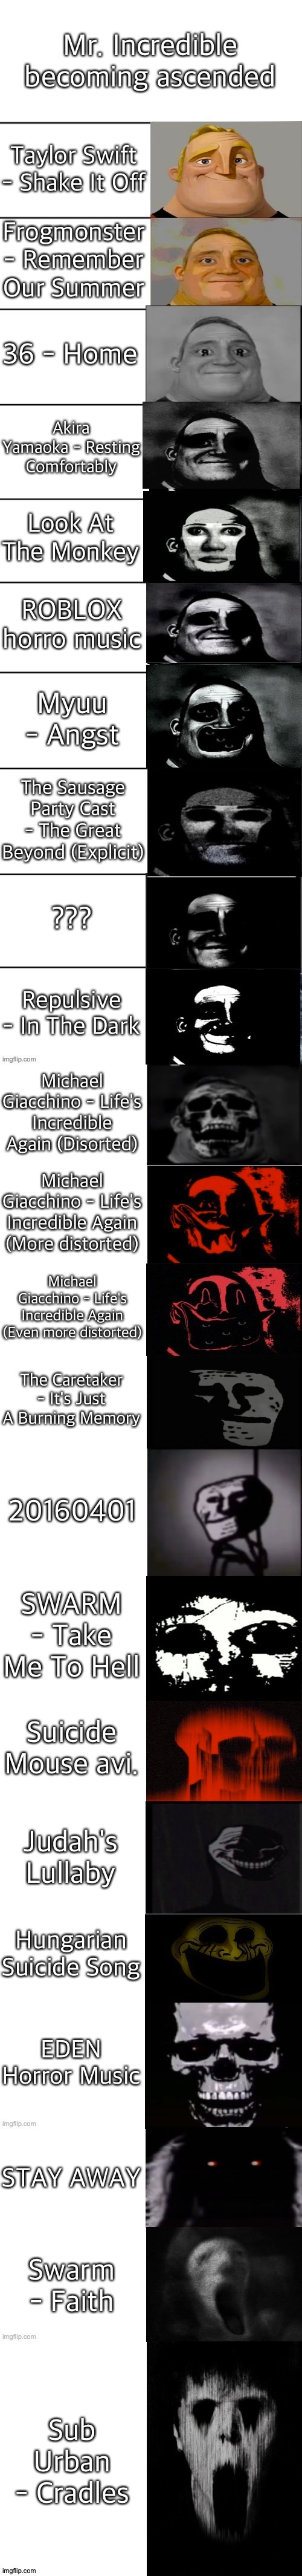 Mr. Incredible becoming ascended: All song names! - Imgflip